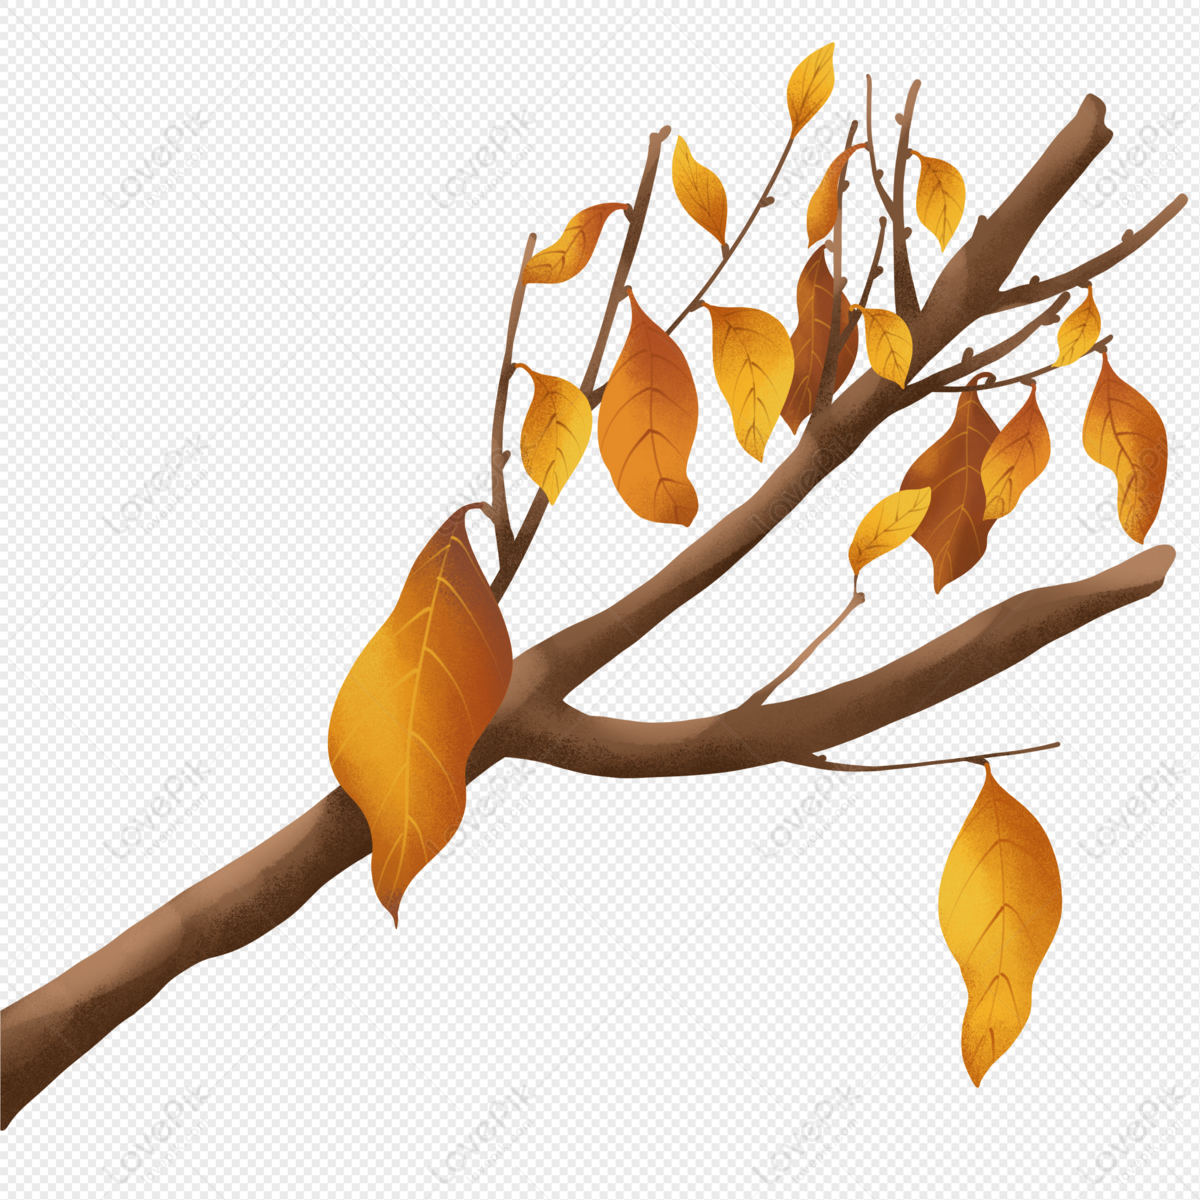 Dry Leaves PNG Transparent Background And Clipart Image For Free Download -  Lovepik | 401782070